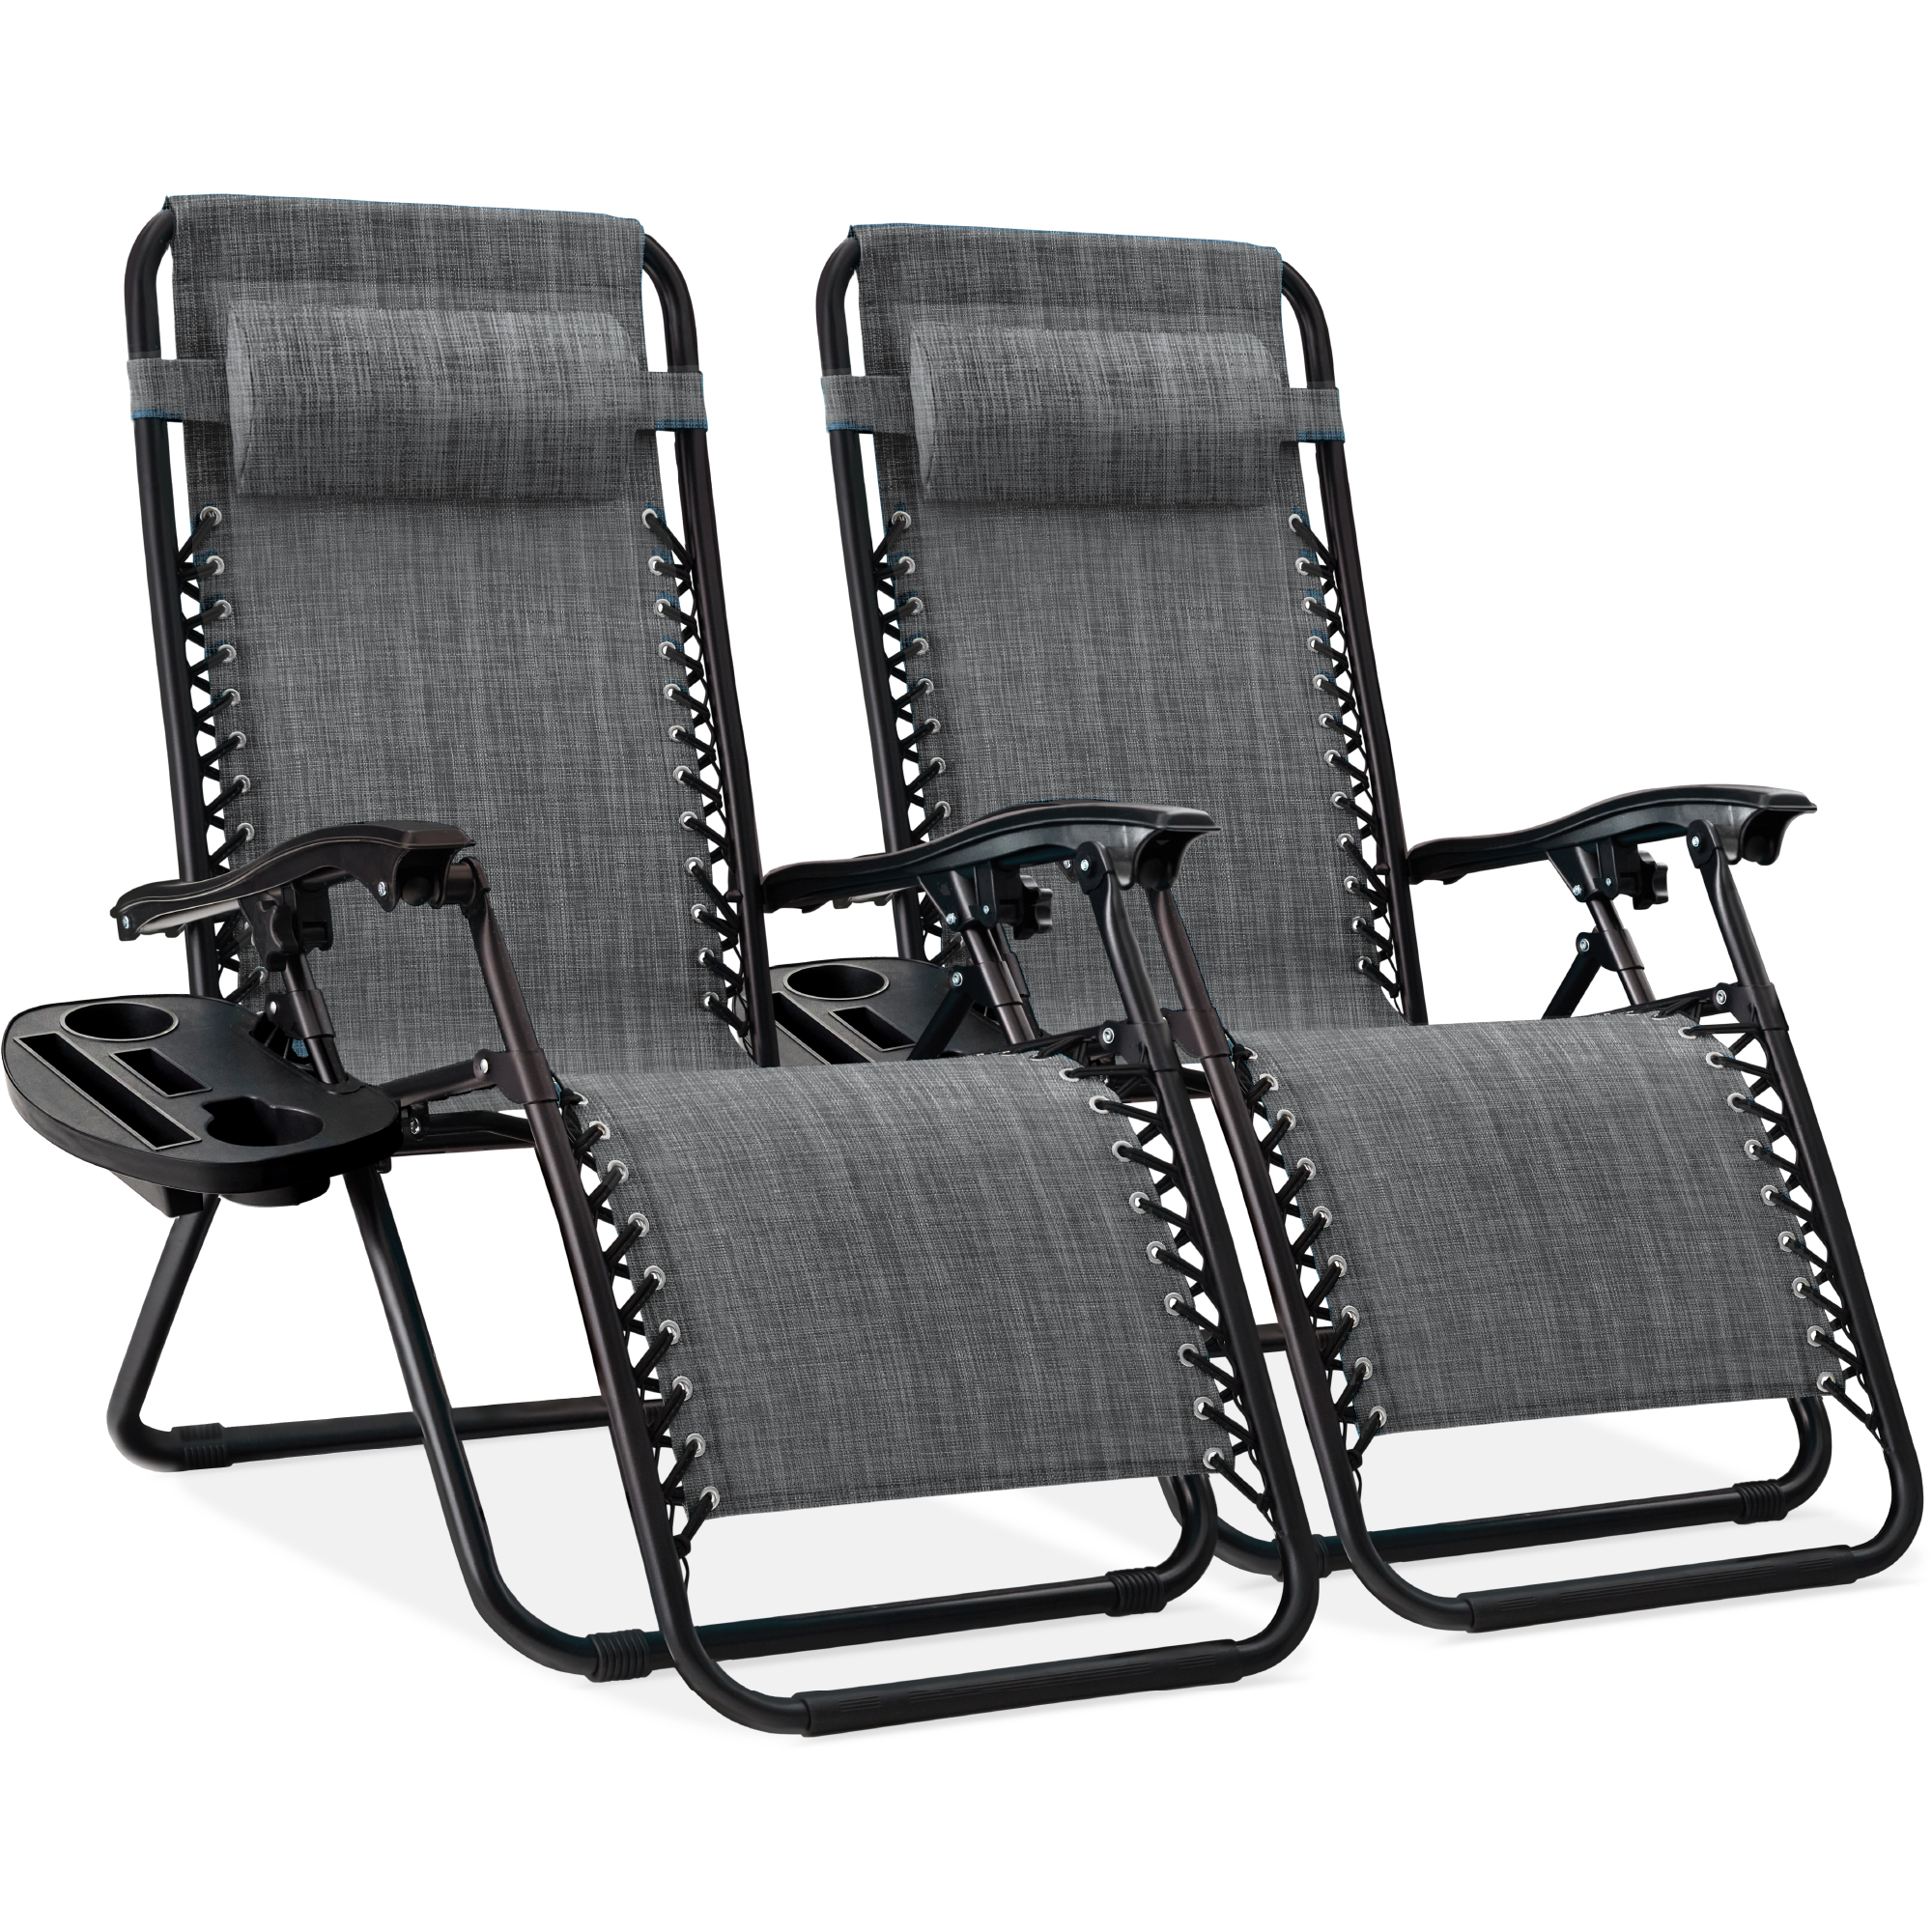 Best Choice Products Set of 2 Zero Gravity Lounge Chair Recliners for Patio, Pool w/ Cup Holder Tray - Gray - image 1 of 8